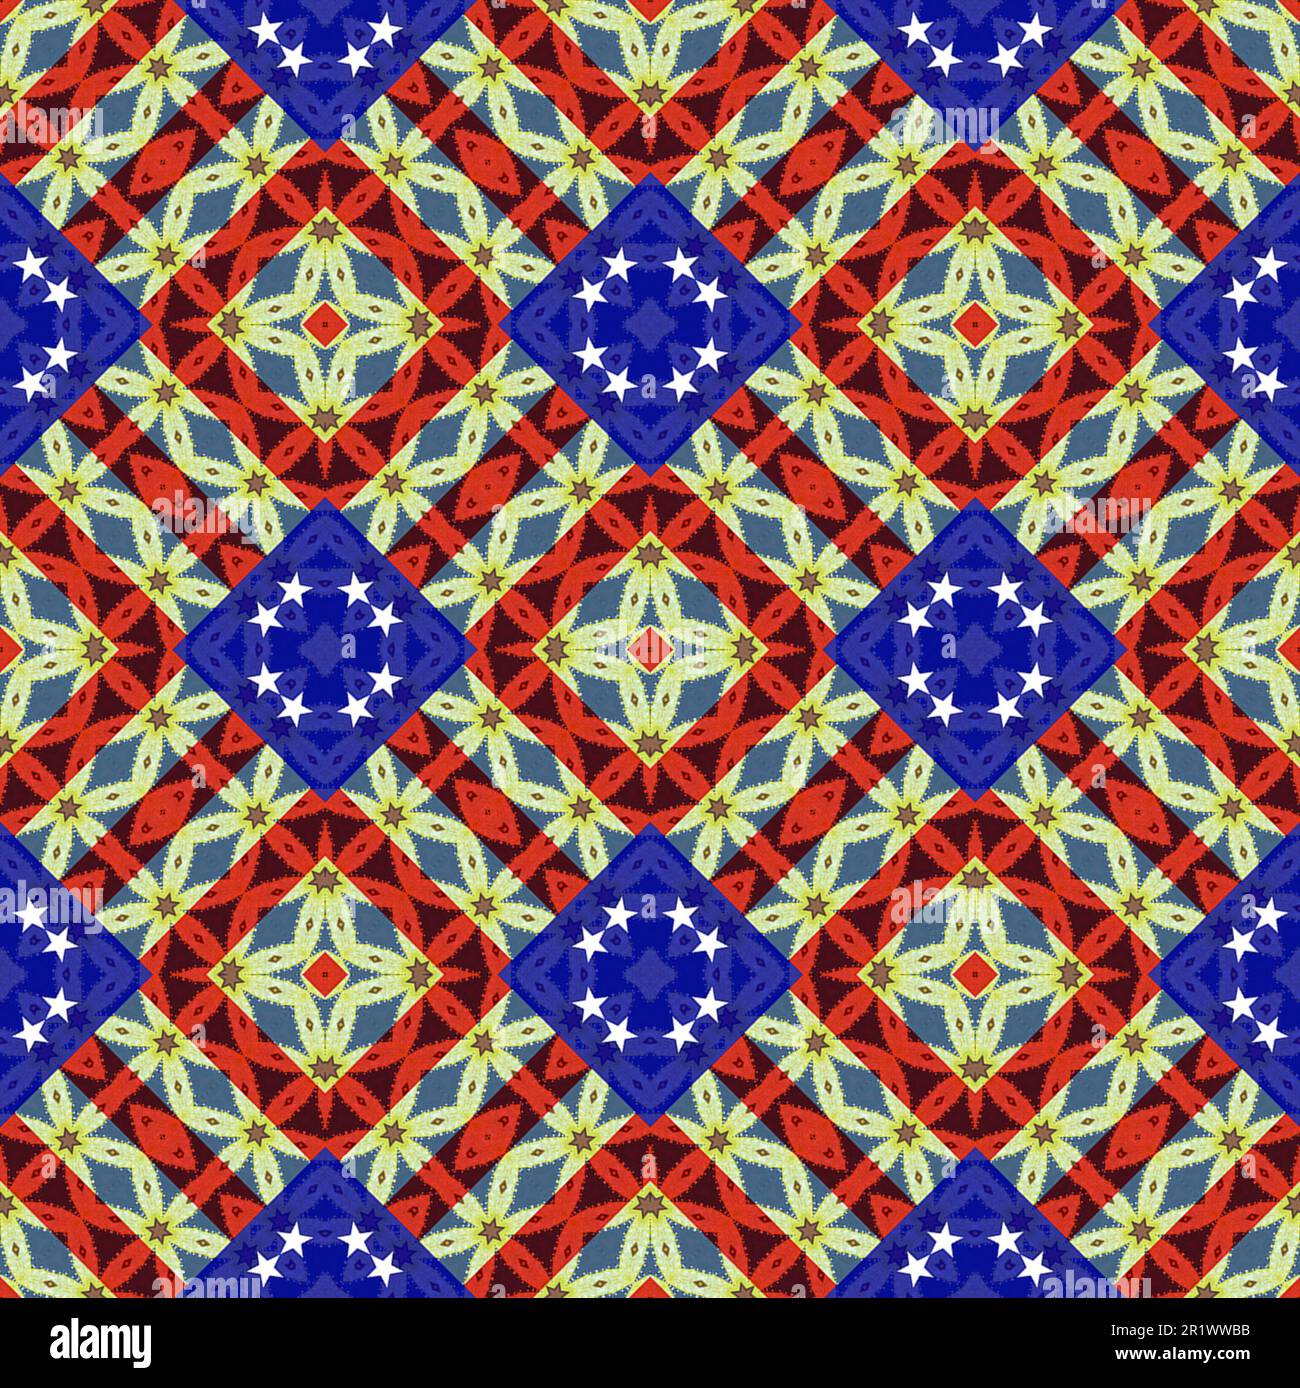 Intricate red white blue and yellow gold seamless pattern with star design motifs for the Fourth of July, Independence Memorial or Labor Day holidays Stock Photo